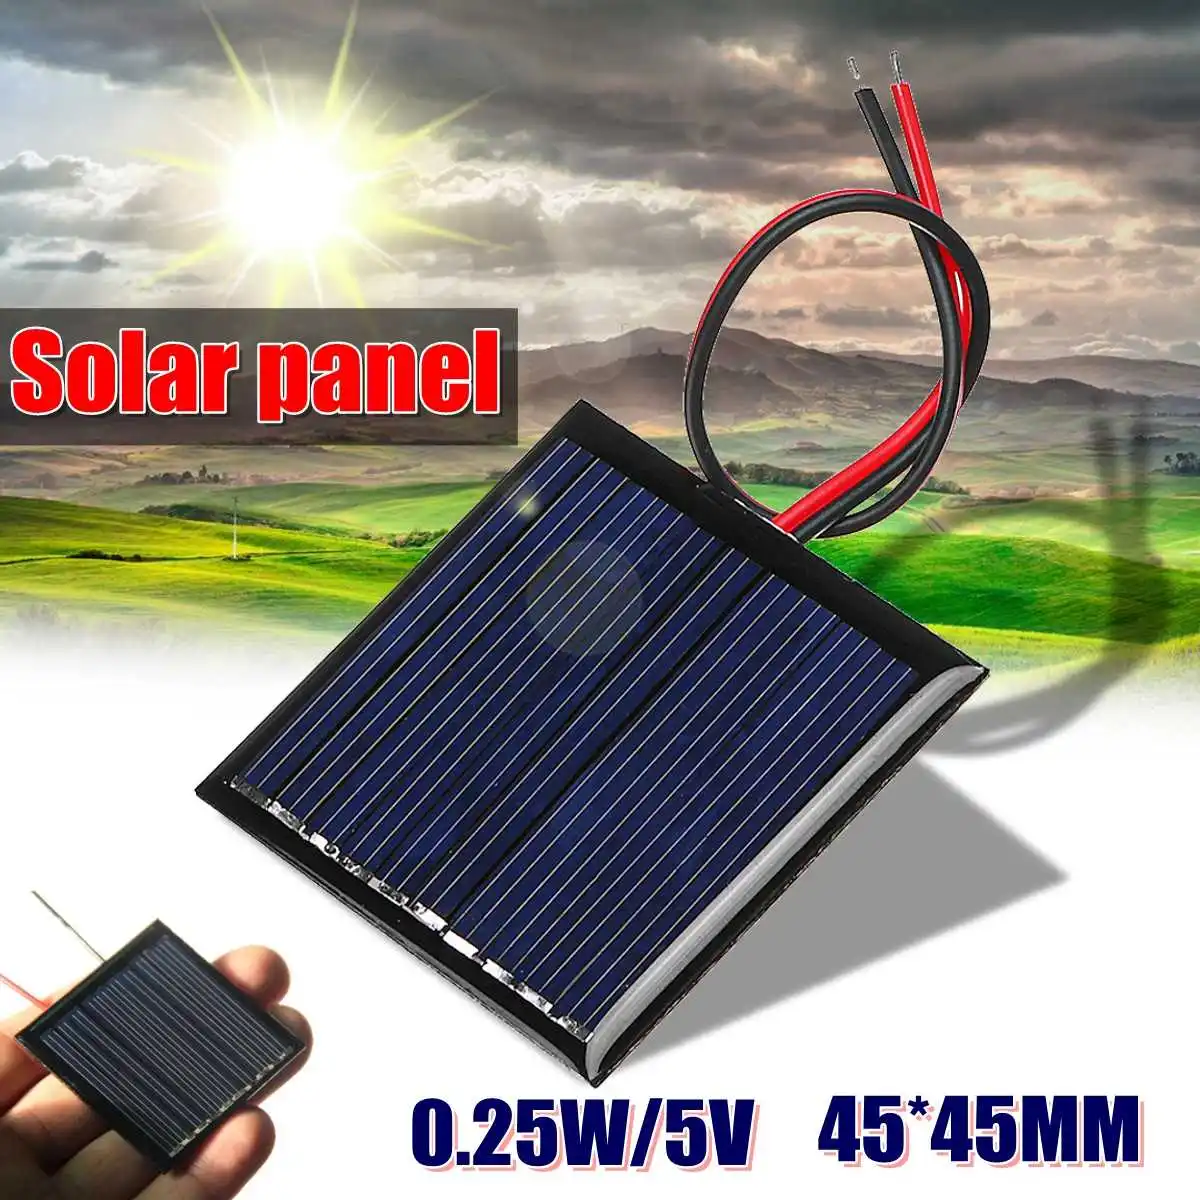 Black 0.25W 5V 4545MM Mini Solar Power Cell Polycrystalline Board Panel Charger